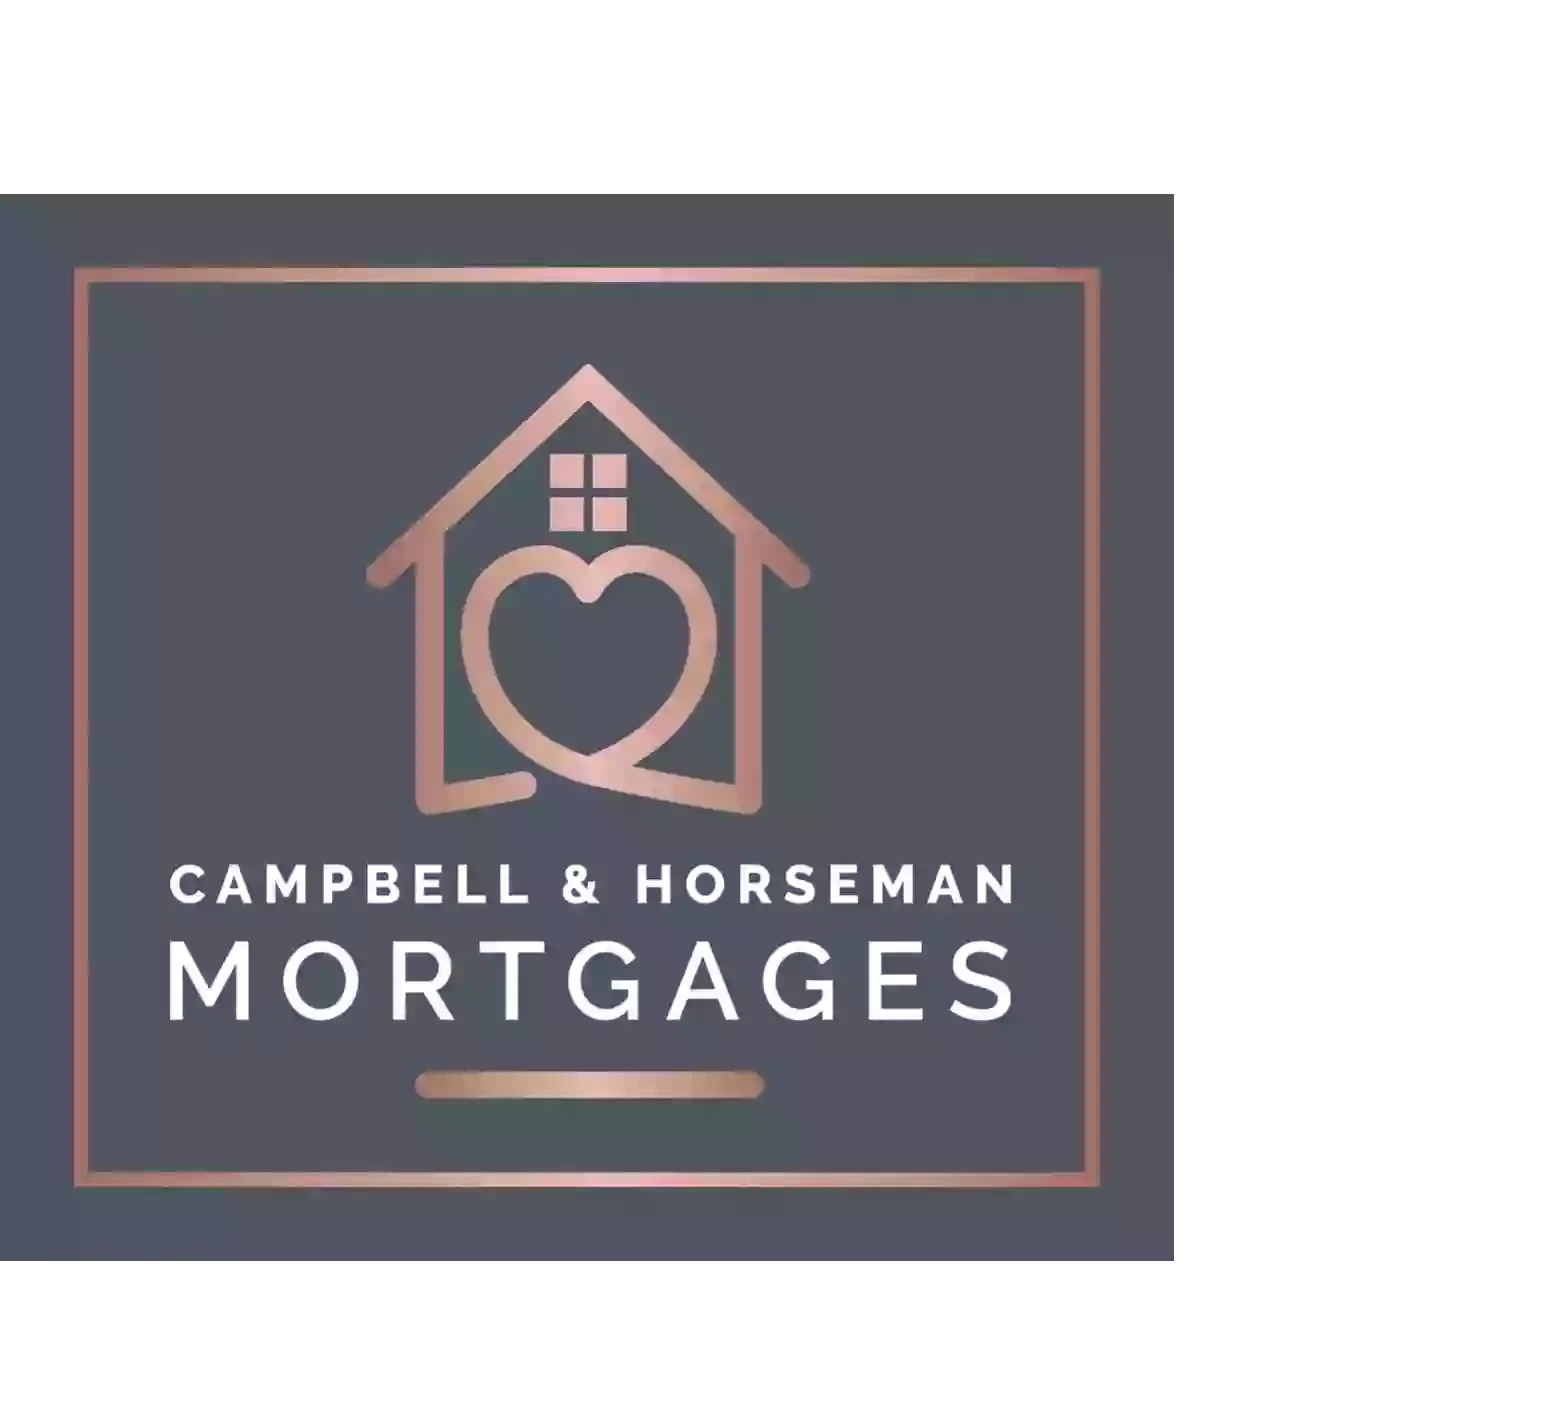 Campbell & Horseman Mortgages